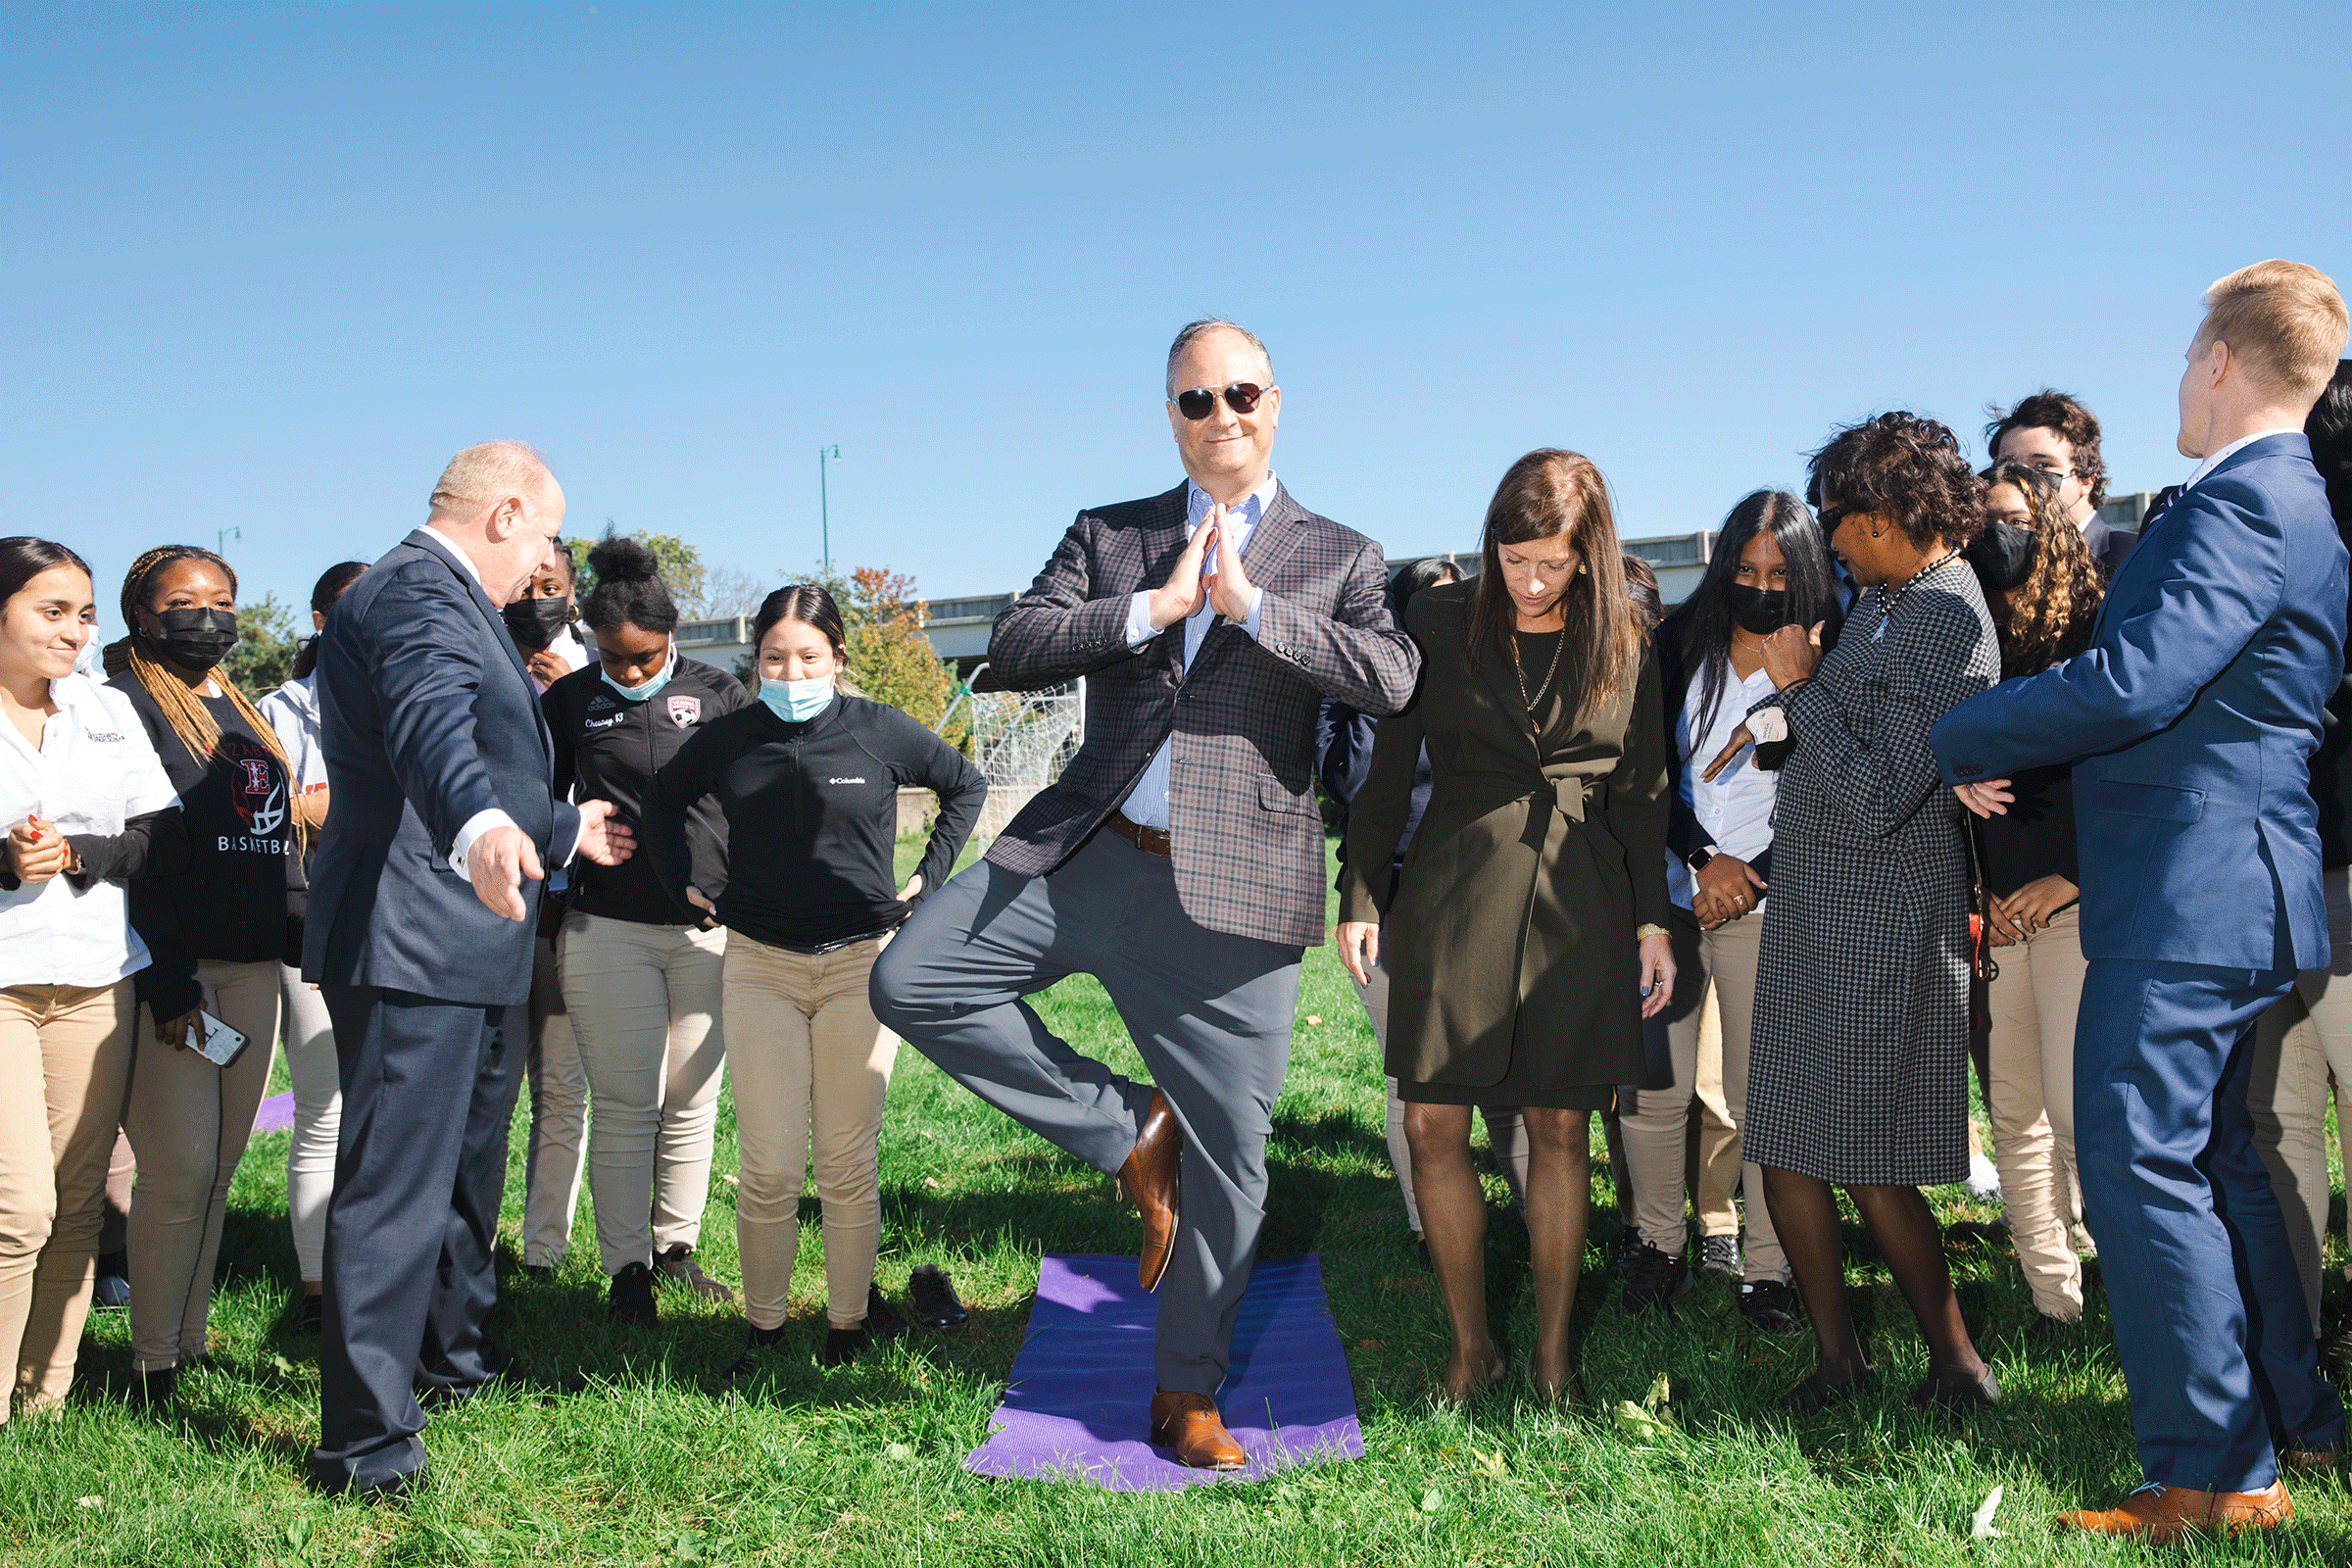 Emhoff practices his tree pose with a yoga class during a visit to New Jersey on Oct. 19, 2021. (Landon Nordeman for TIME)